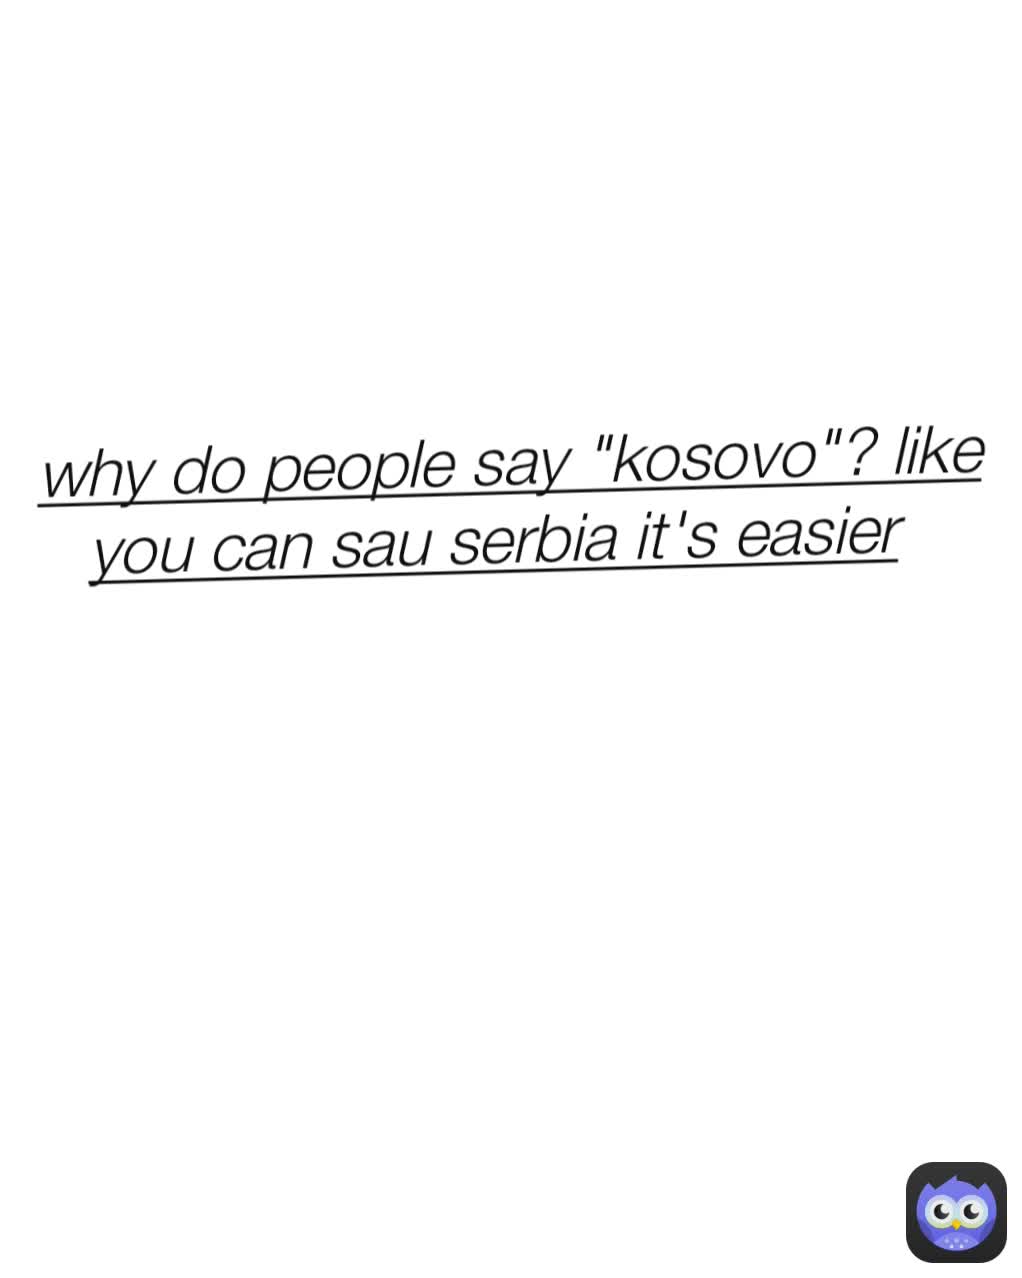 why do people say "kosovo"? like you can sau serbia it's easier